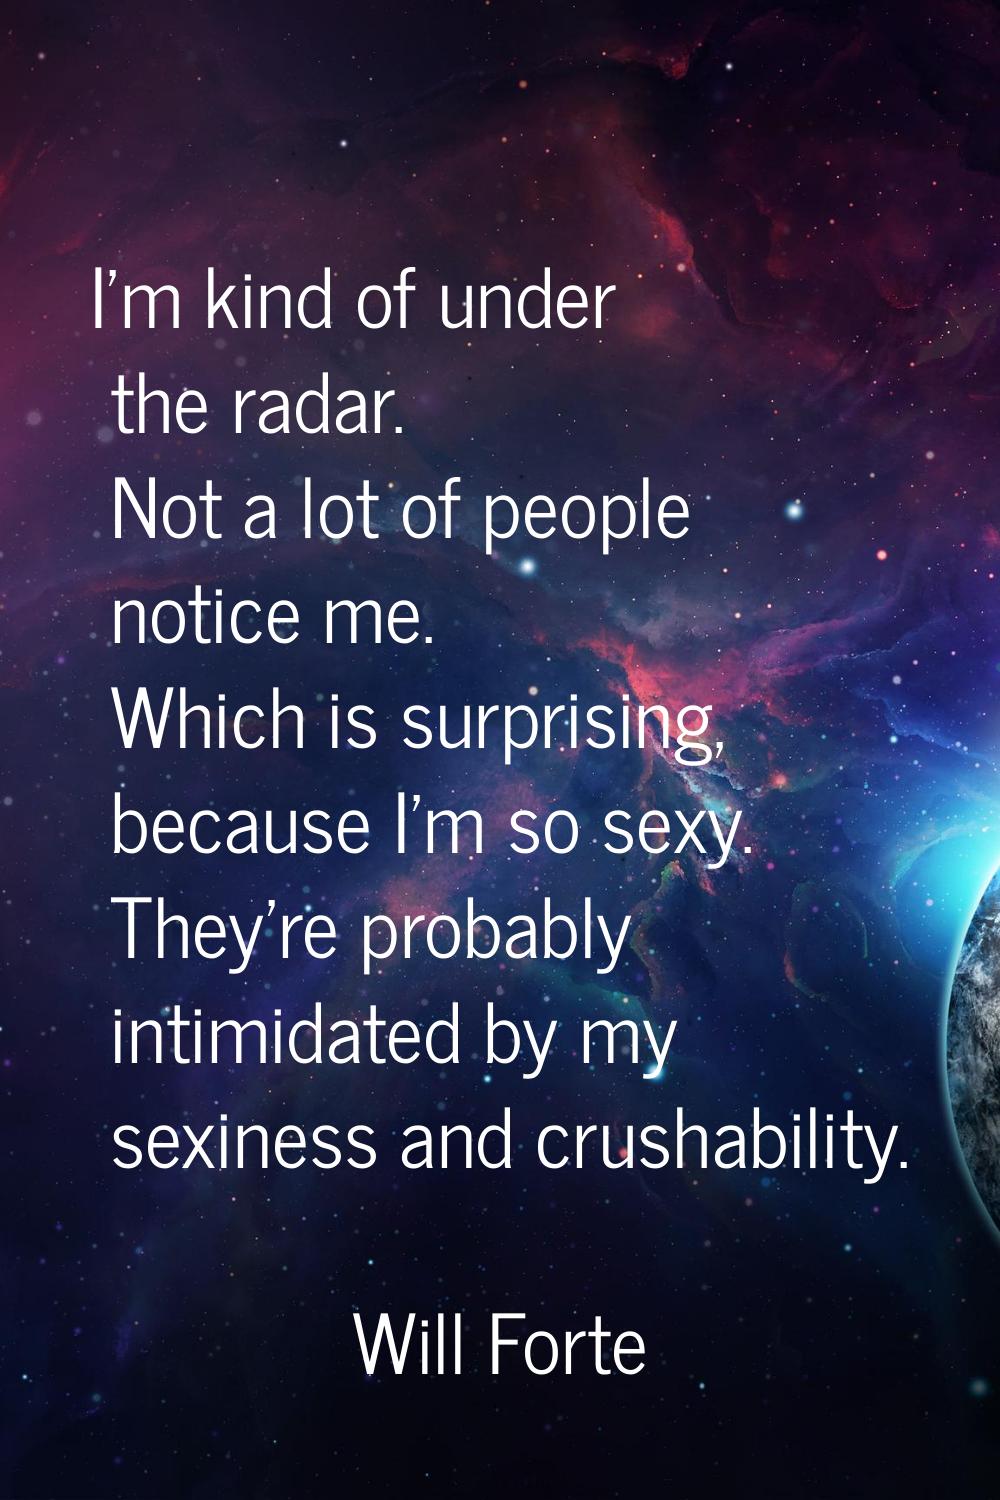 I'm kind of under the radar. Not a lot of people notice me. Which is surprising, because I'm so sex